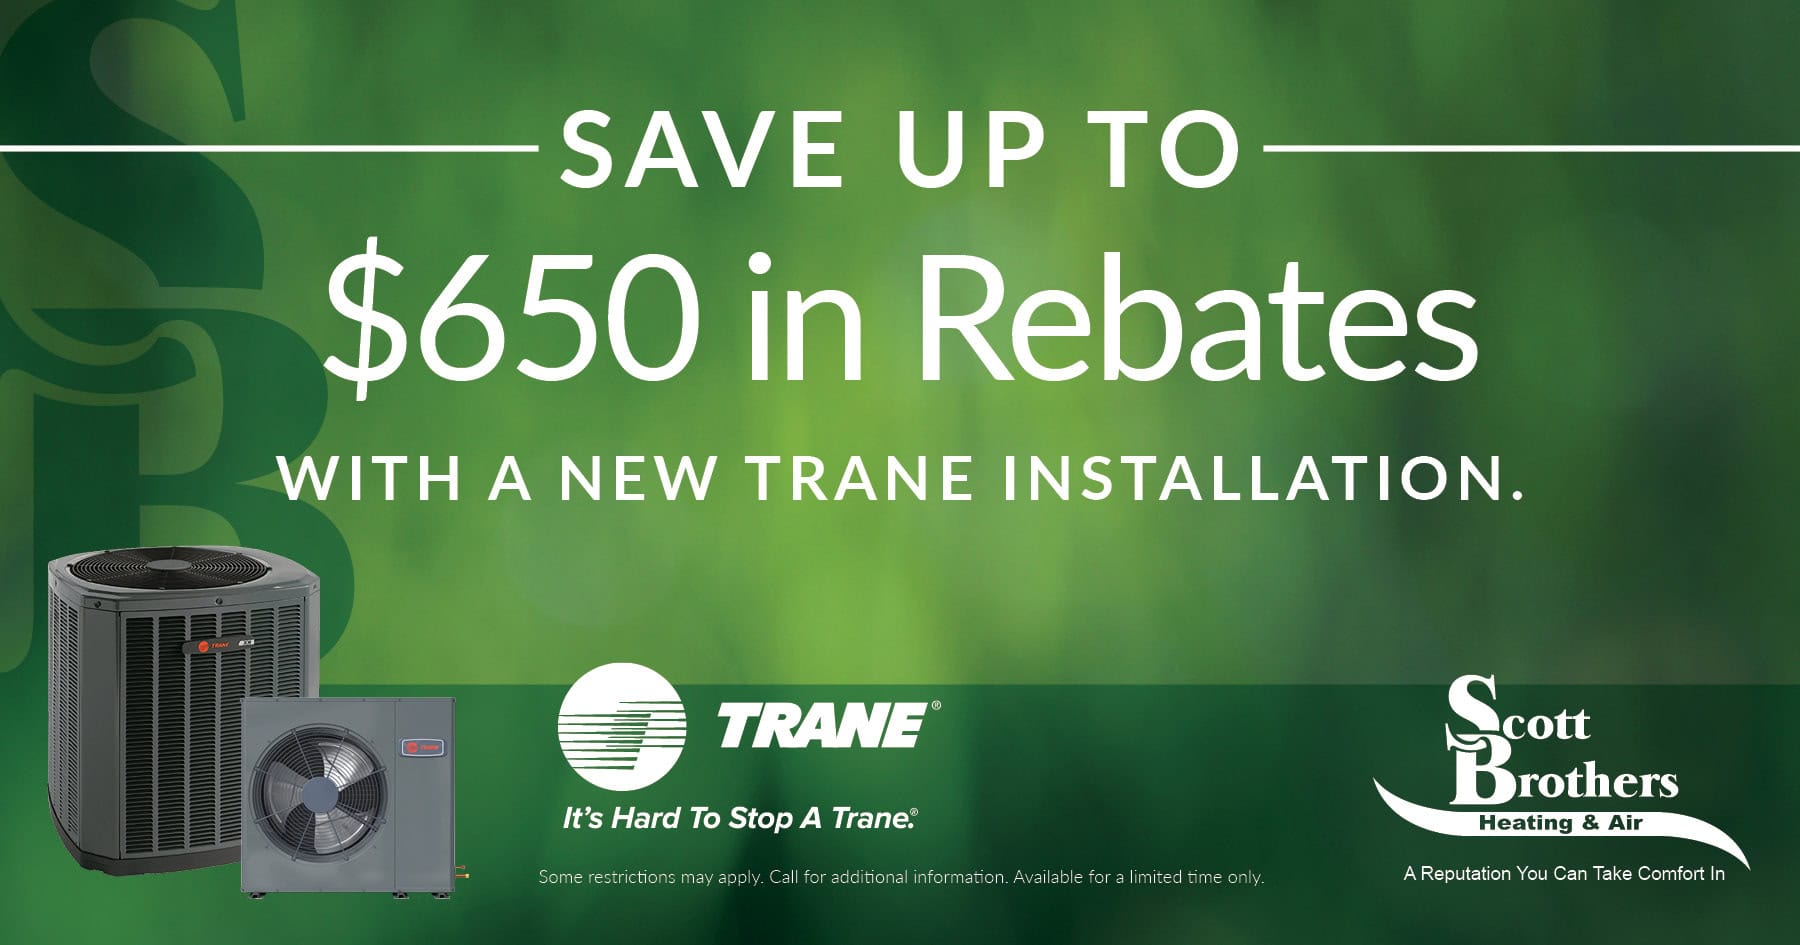 Save up to 0 in rebates with a new Trane installation. Some restrictions may apply. Call for additional information. Available for a limited time only.